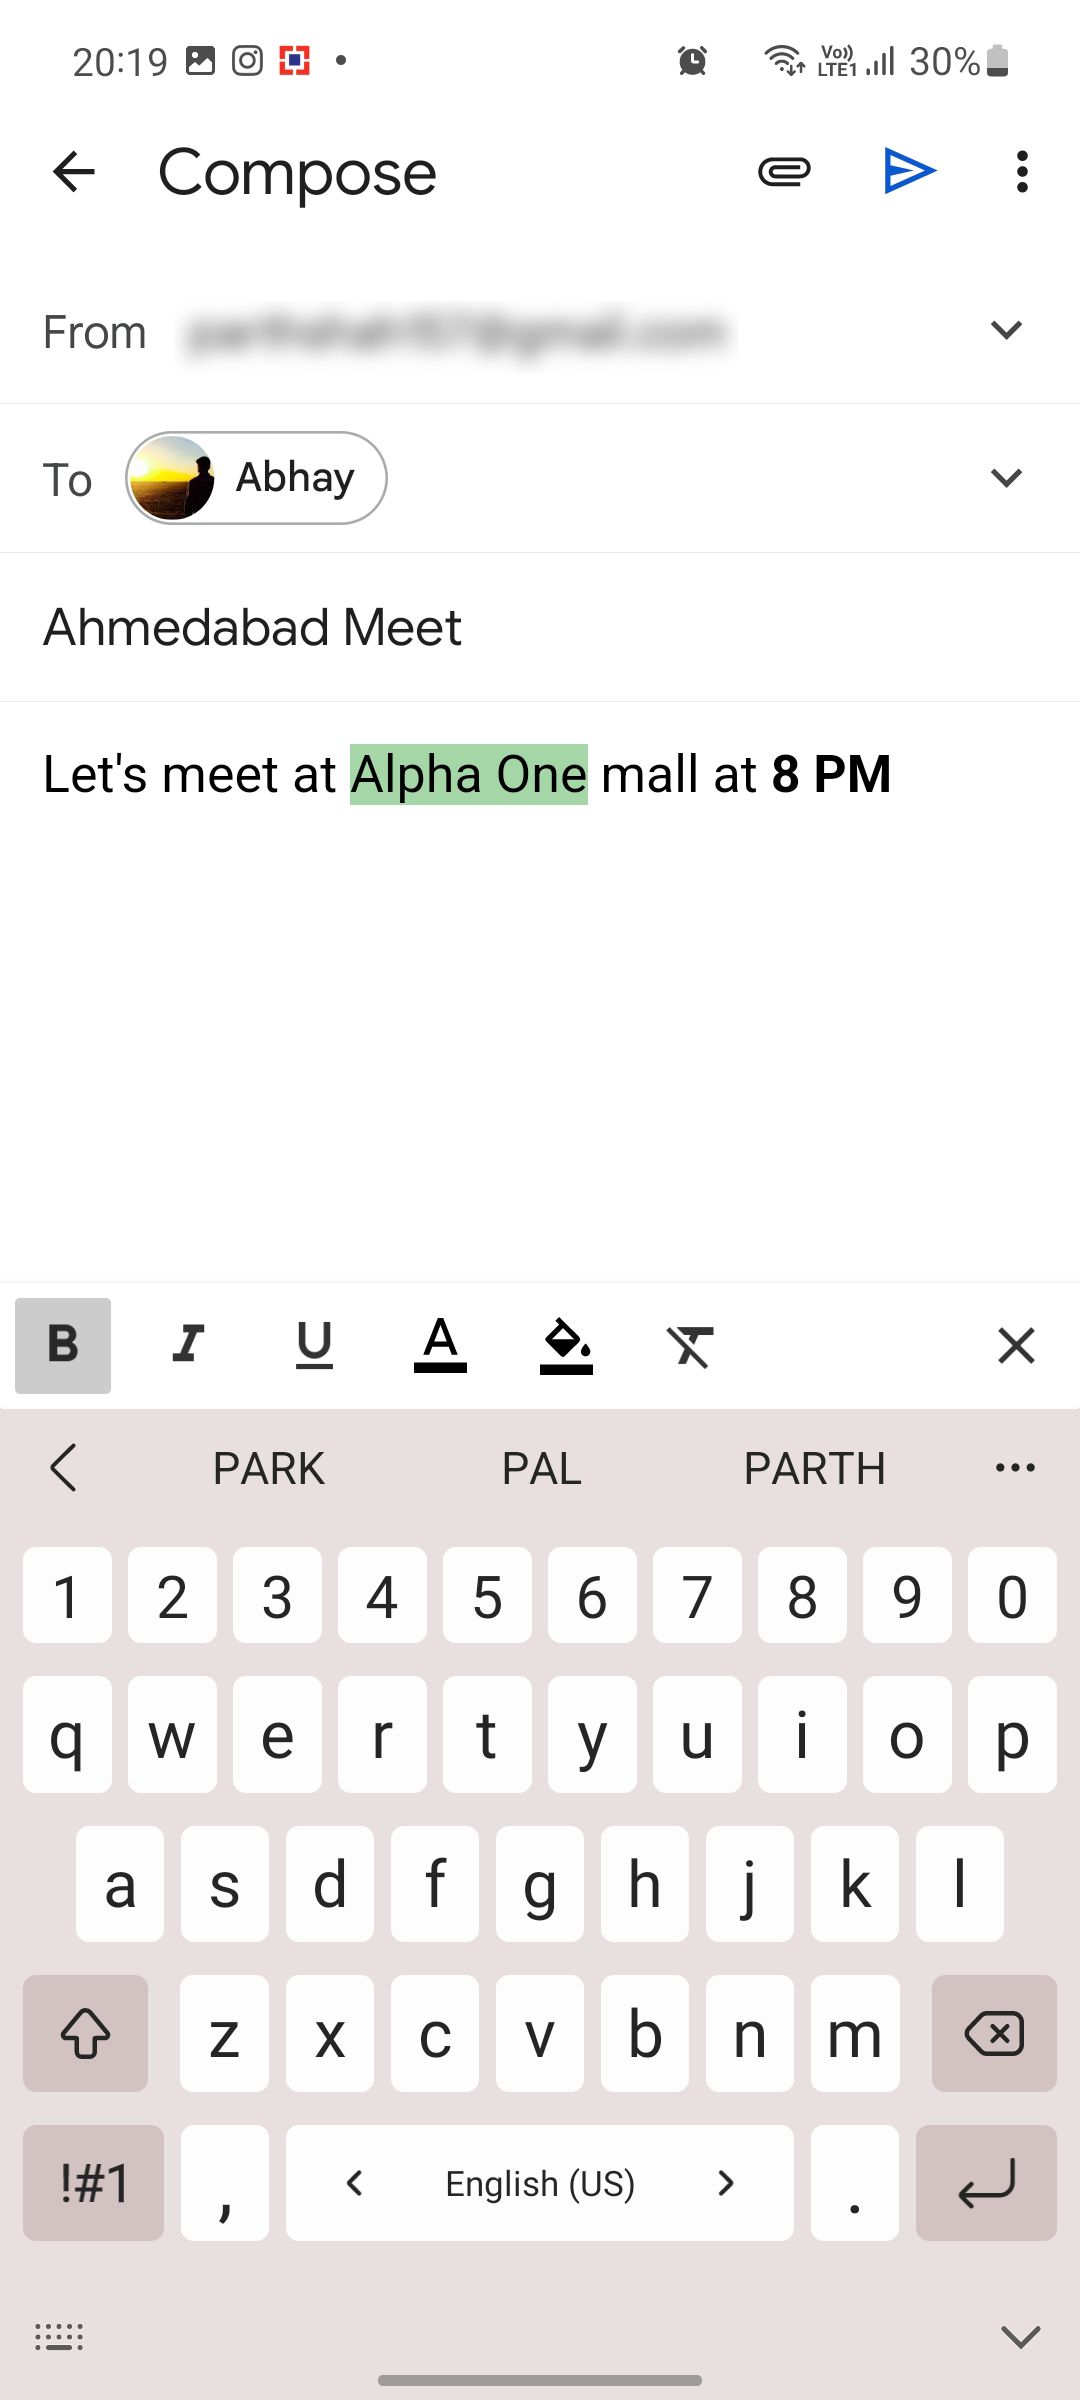 The formatting options appear below the message window in Gmail.